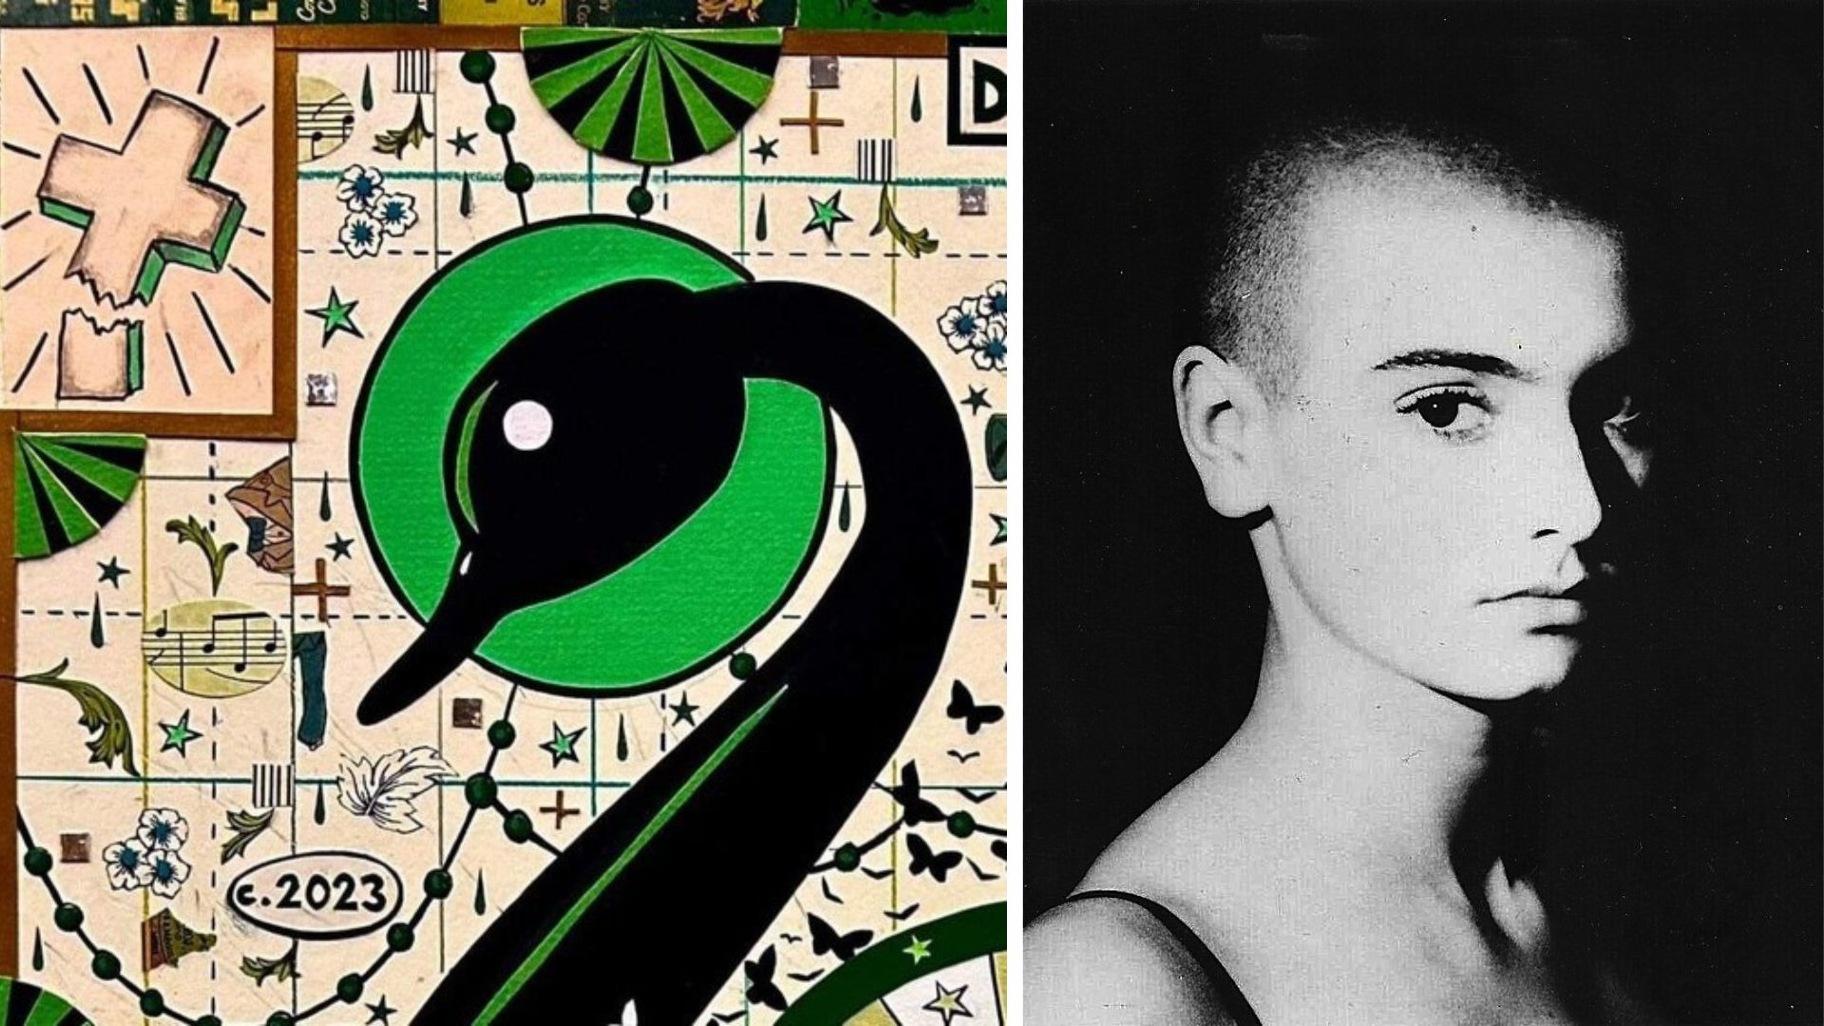 Left: “Psalms for an Irish Girl” by Chicago artist Tony Fitzpatrick. (Provided); Right: Sinéad O’Connor in 1987. (Courtesy of Chrysalis Records)